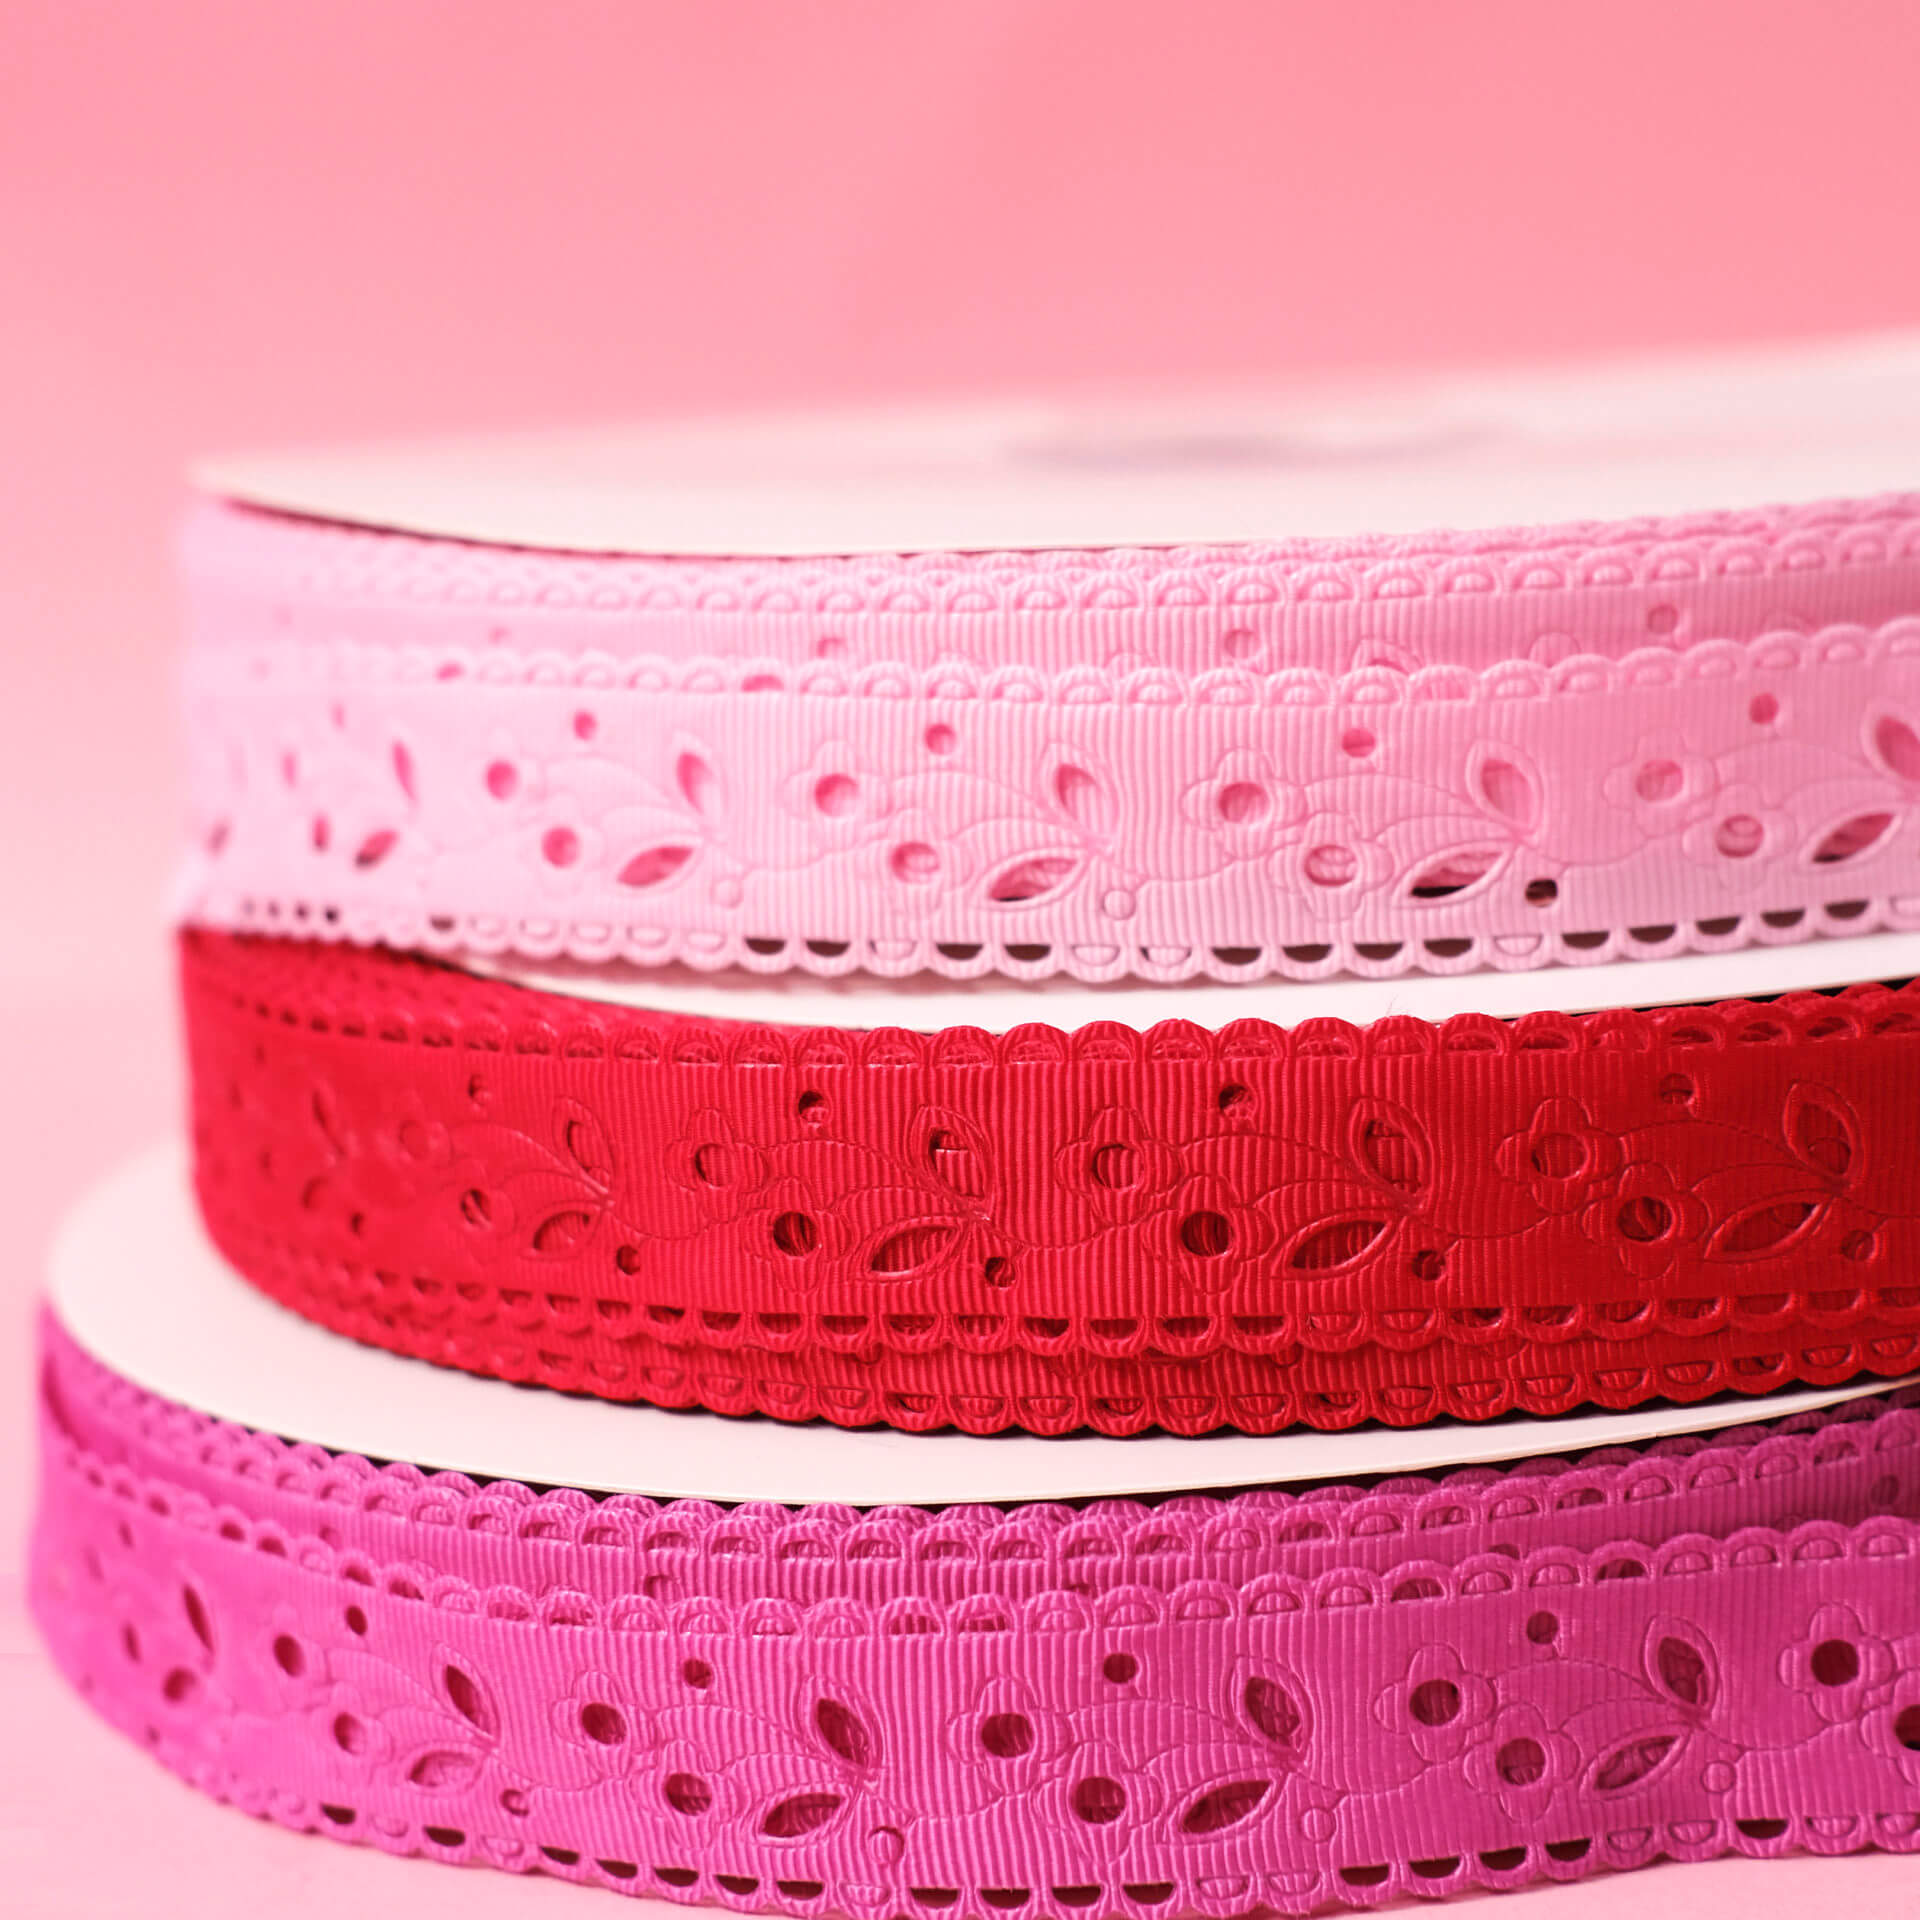 Eve Lace Valentine's Dog Collar - 1.5 Inch Wide for Large Dogs + Greyhounds  Eve Lace Valentine's Dog Collar - 1.5 Inch Wide for Large Dogs +